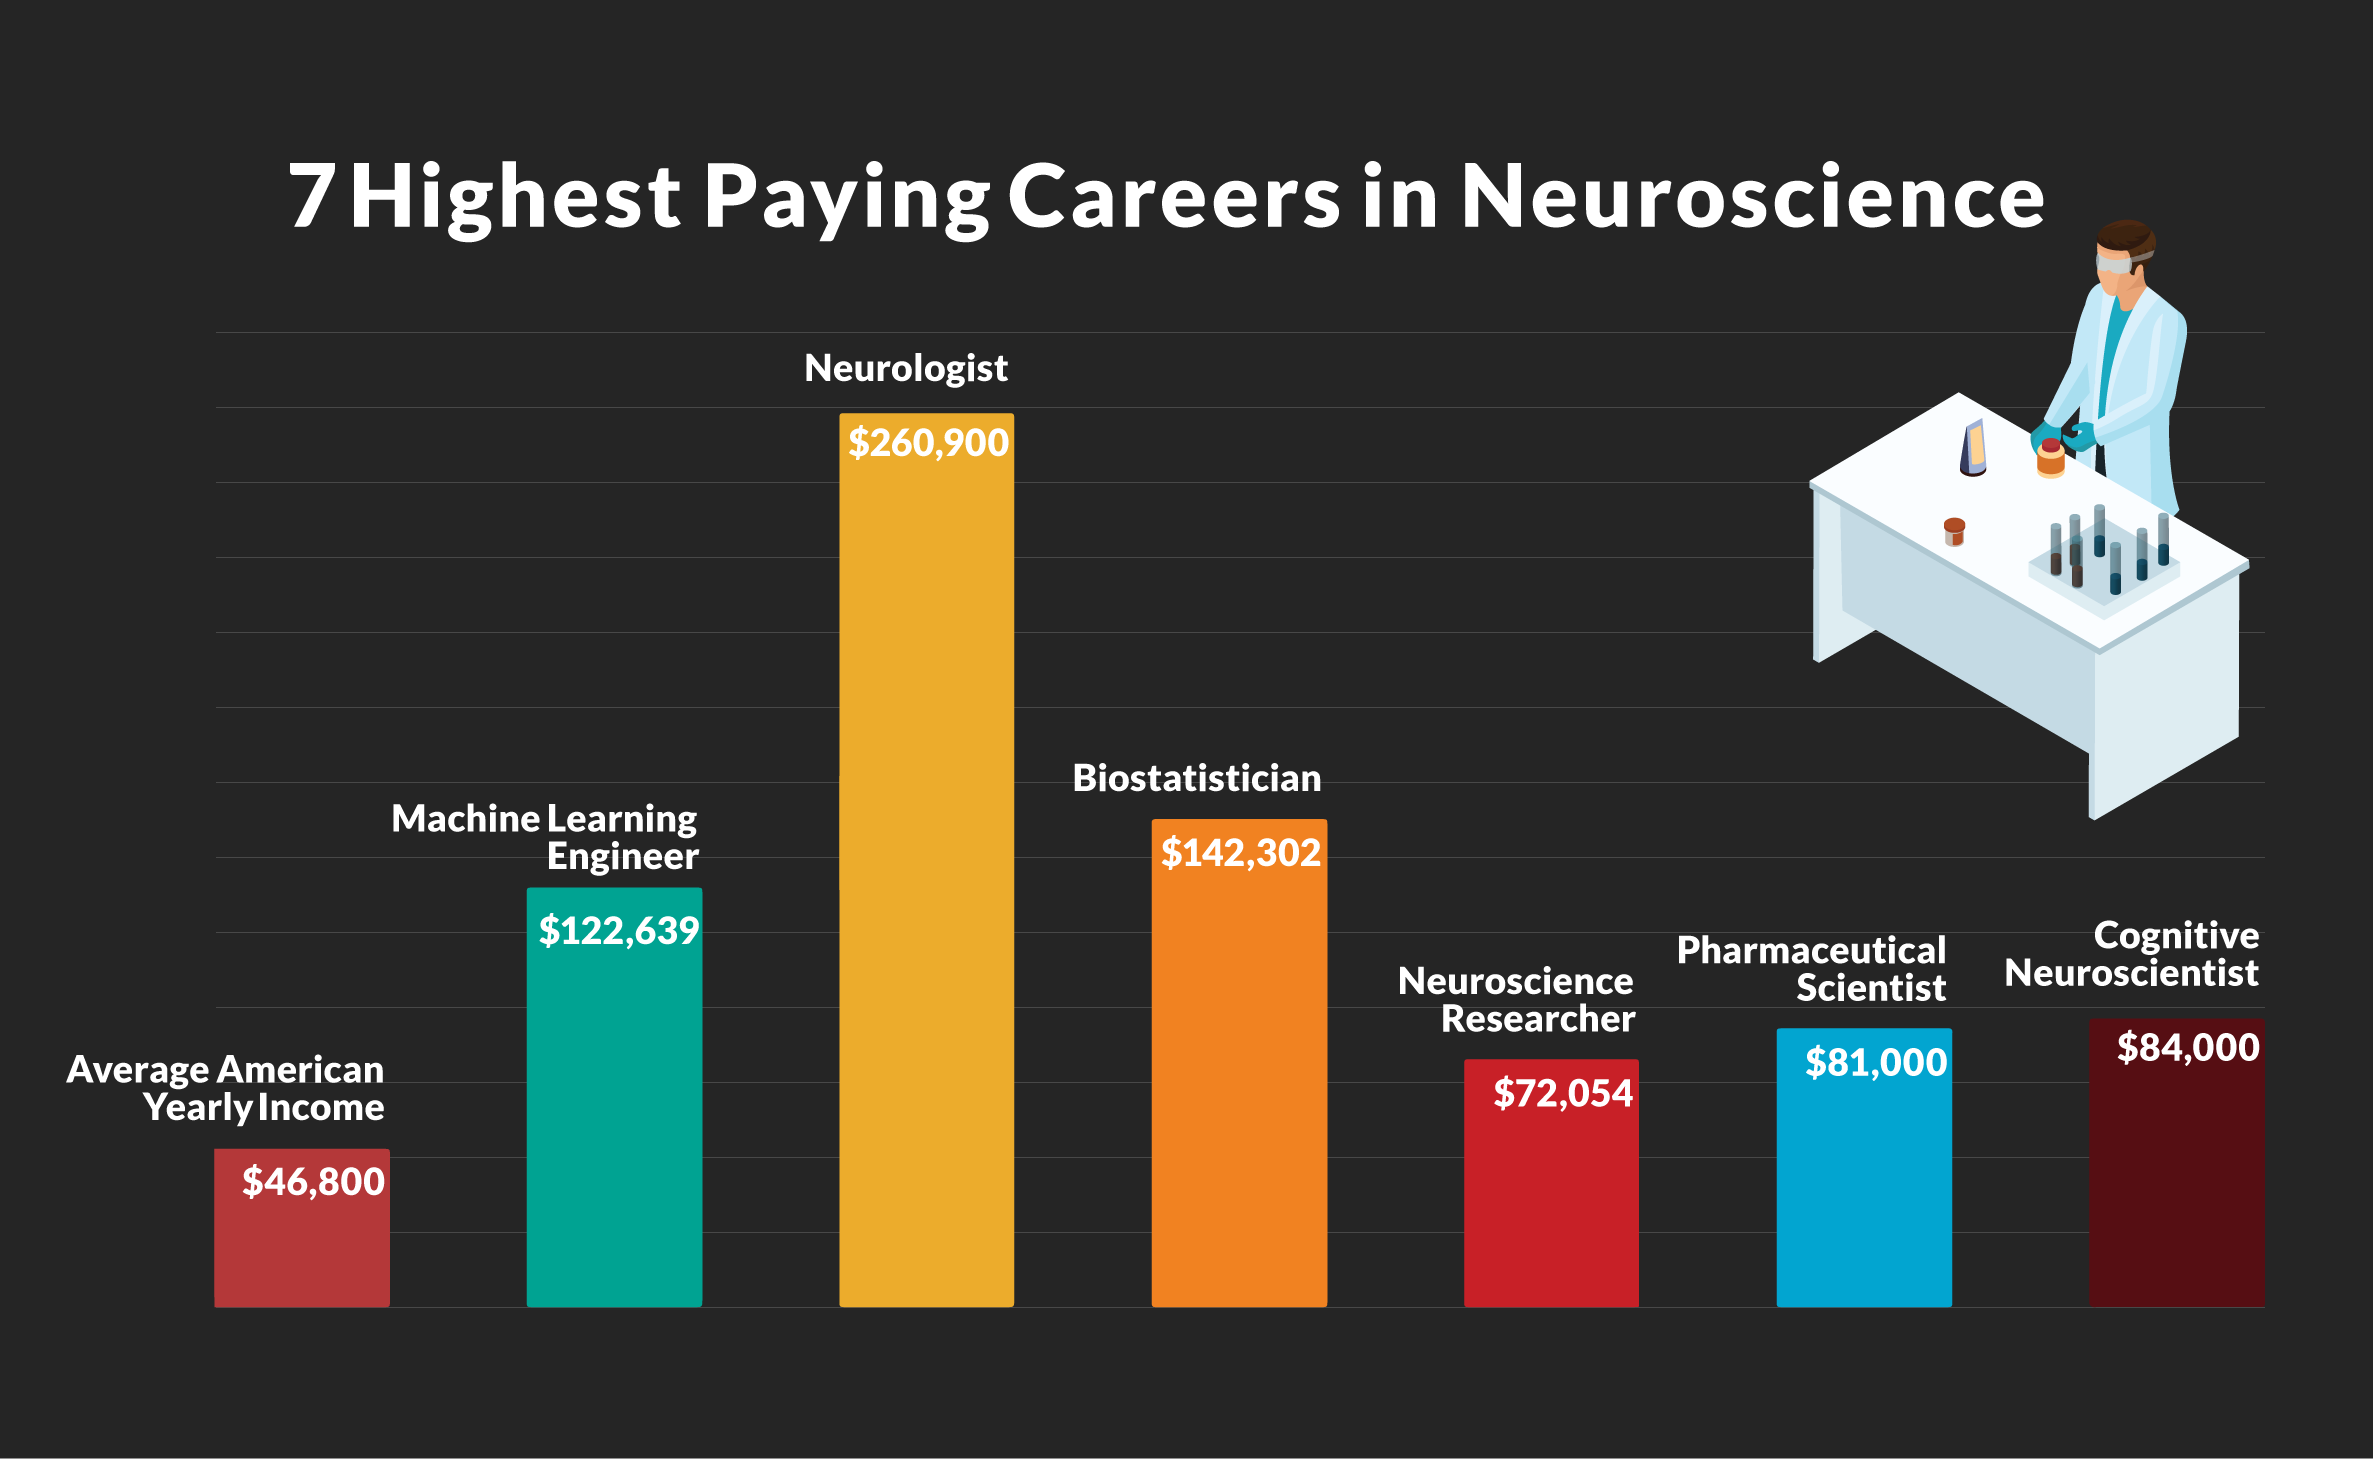 5 Highest Paying Careers in Neuroscience